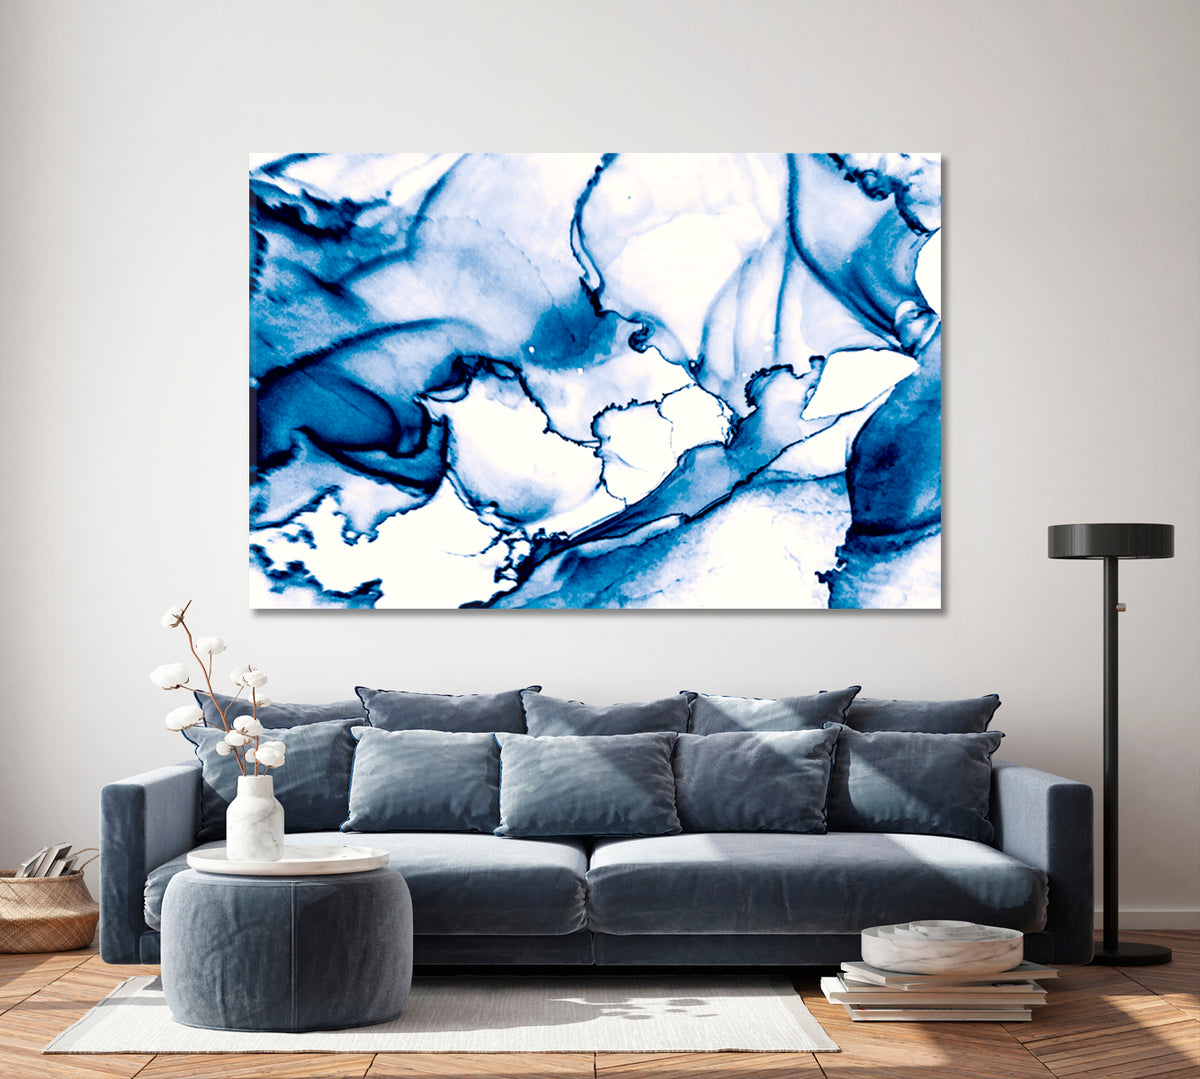 INK IN WATER Navy Blue Abstract Marble Veins Fluid Art, Oriental Marbling Canvas Print Artesty 1 panel 24" x 16" 